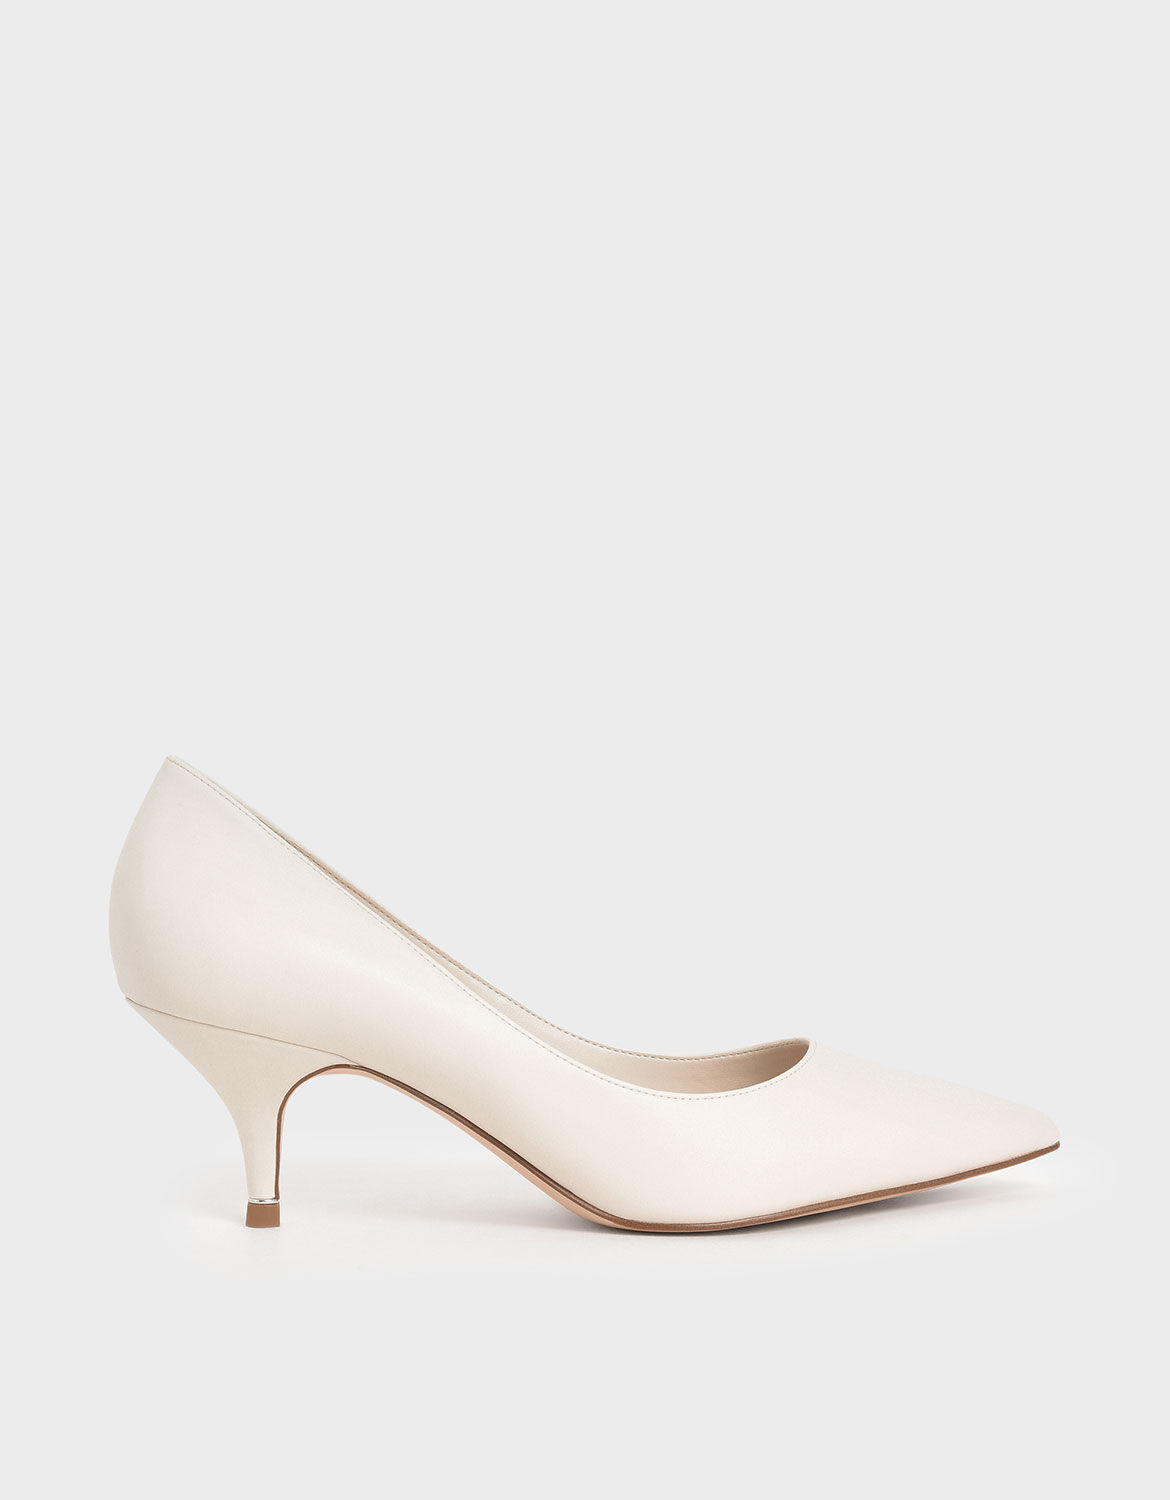 classic pointed toe pumps